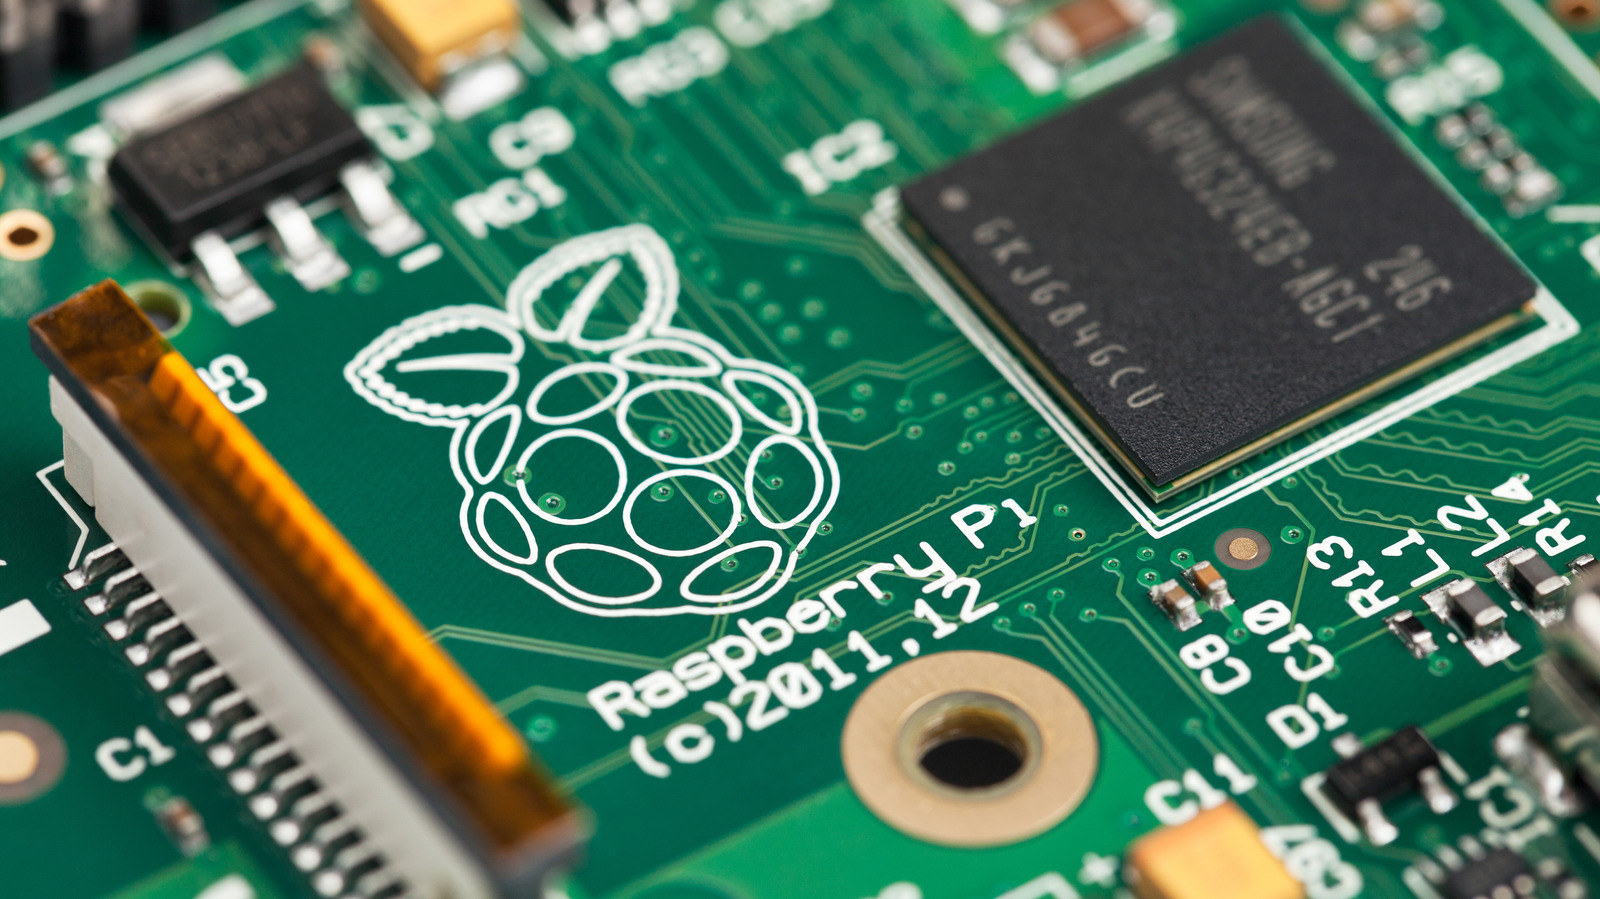 When you think of compact, single-board computers, most casual and even intermediate tech hobbyists will likely think of the Raspberry Pi. Although it